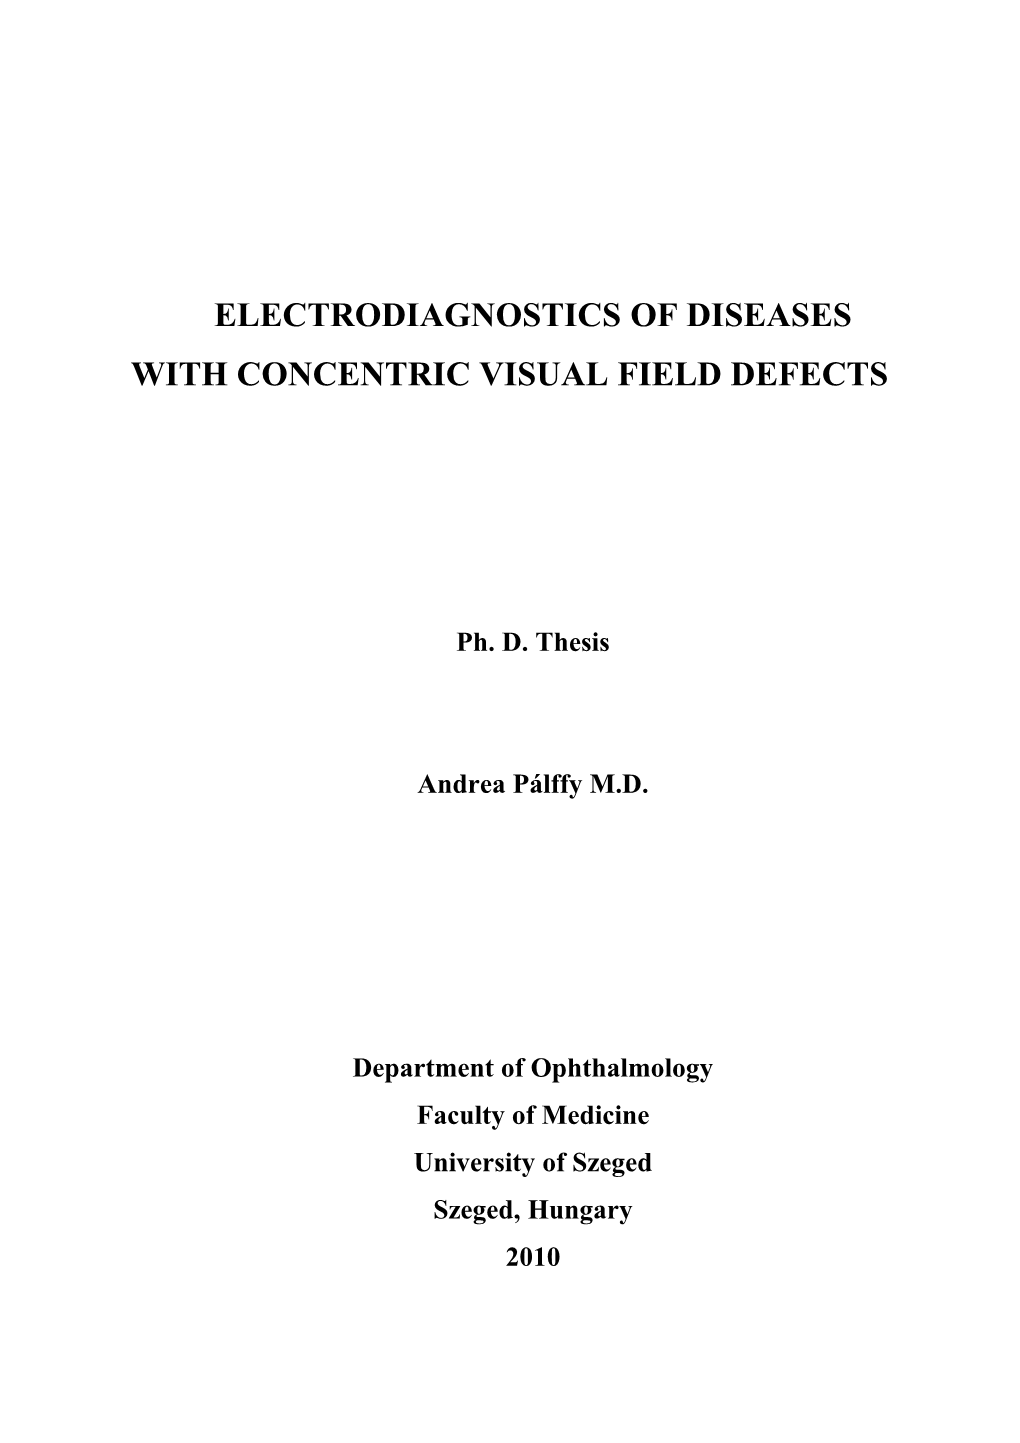 Electrodiagnostics of Diseases with Concentric Visual Field Defects